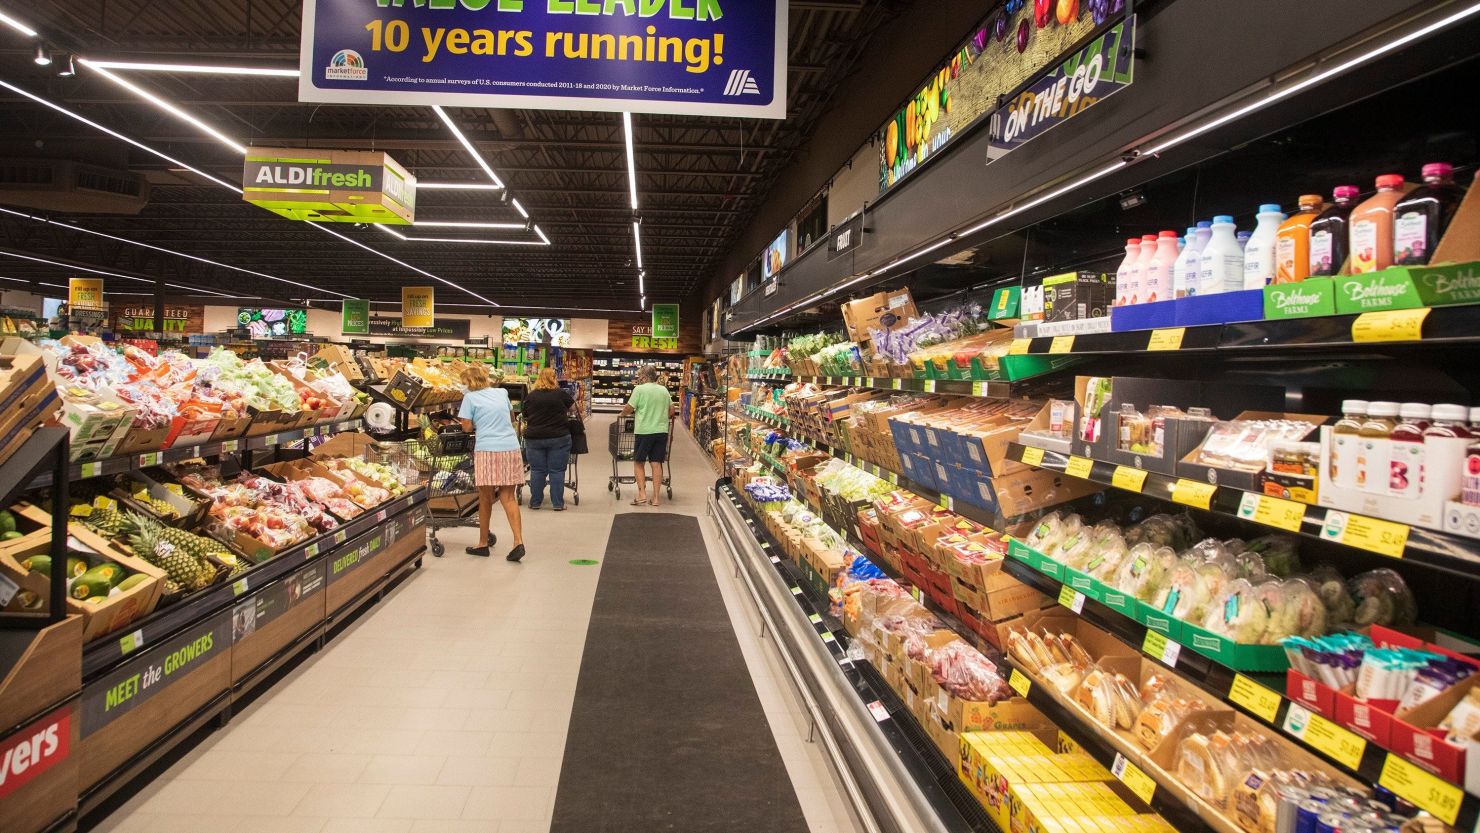 Aldi plans to open 800 new locations in the next five years CNN Business